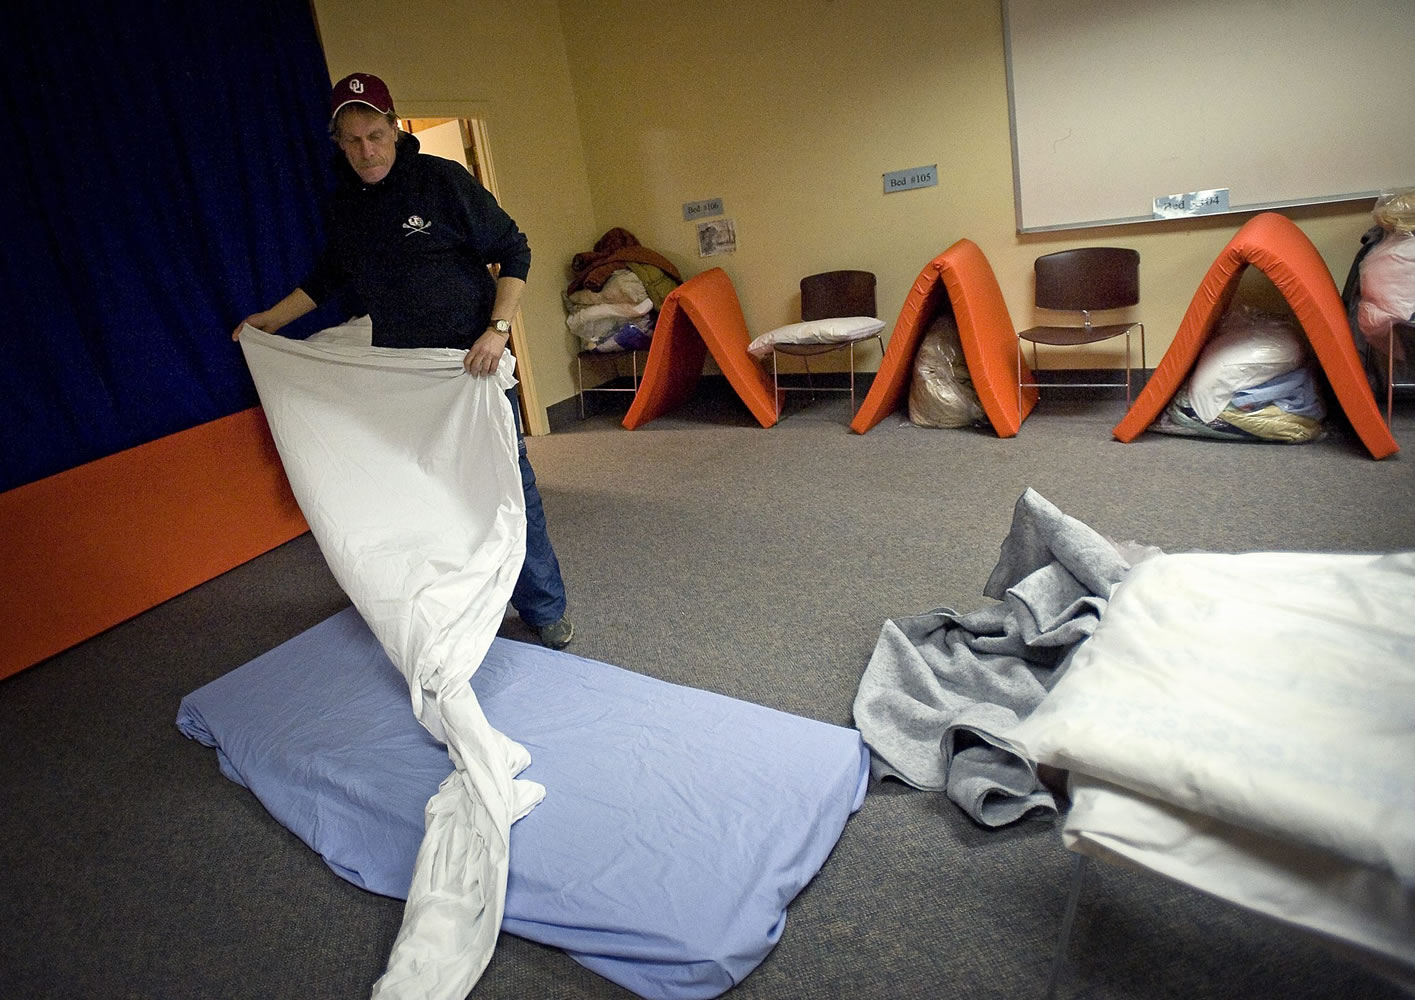 Mark Bailey, 53, gets his bed ready for the night at the Winter Hospitality Overflow shelter at St. Paul Lutheran Church in Vancouver, which houses 24 men a night.